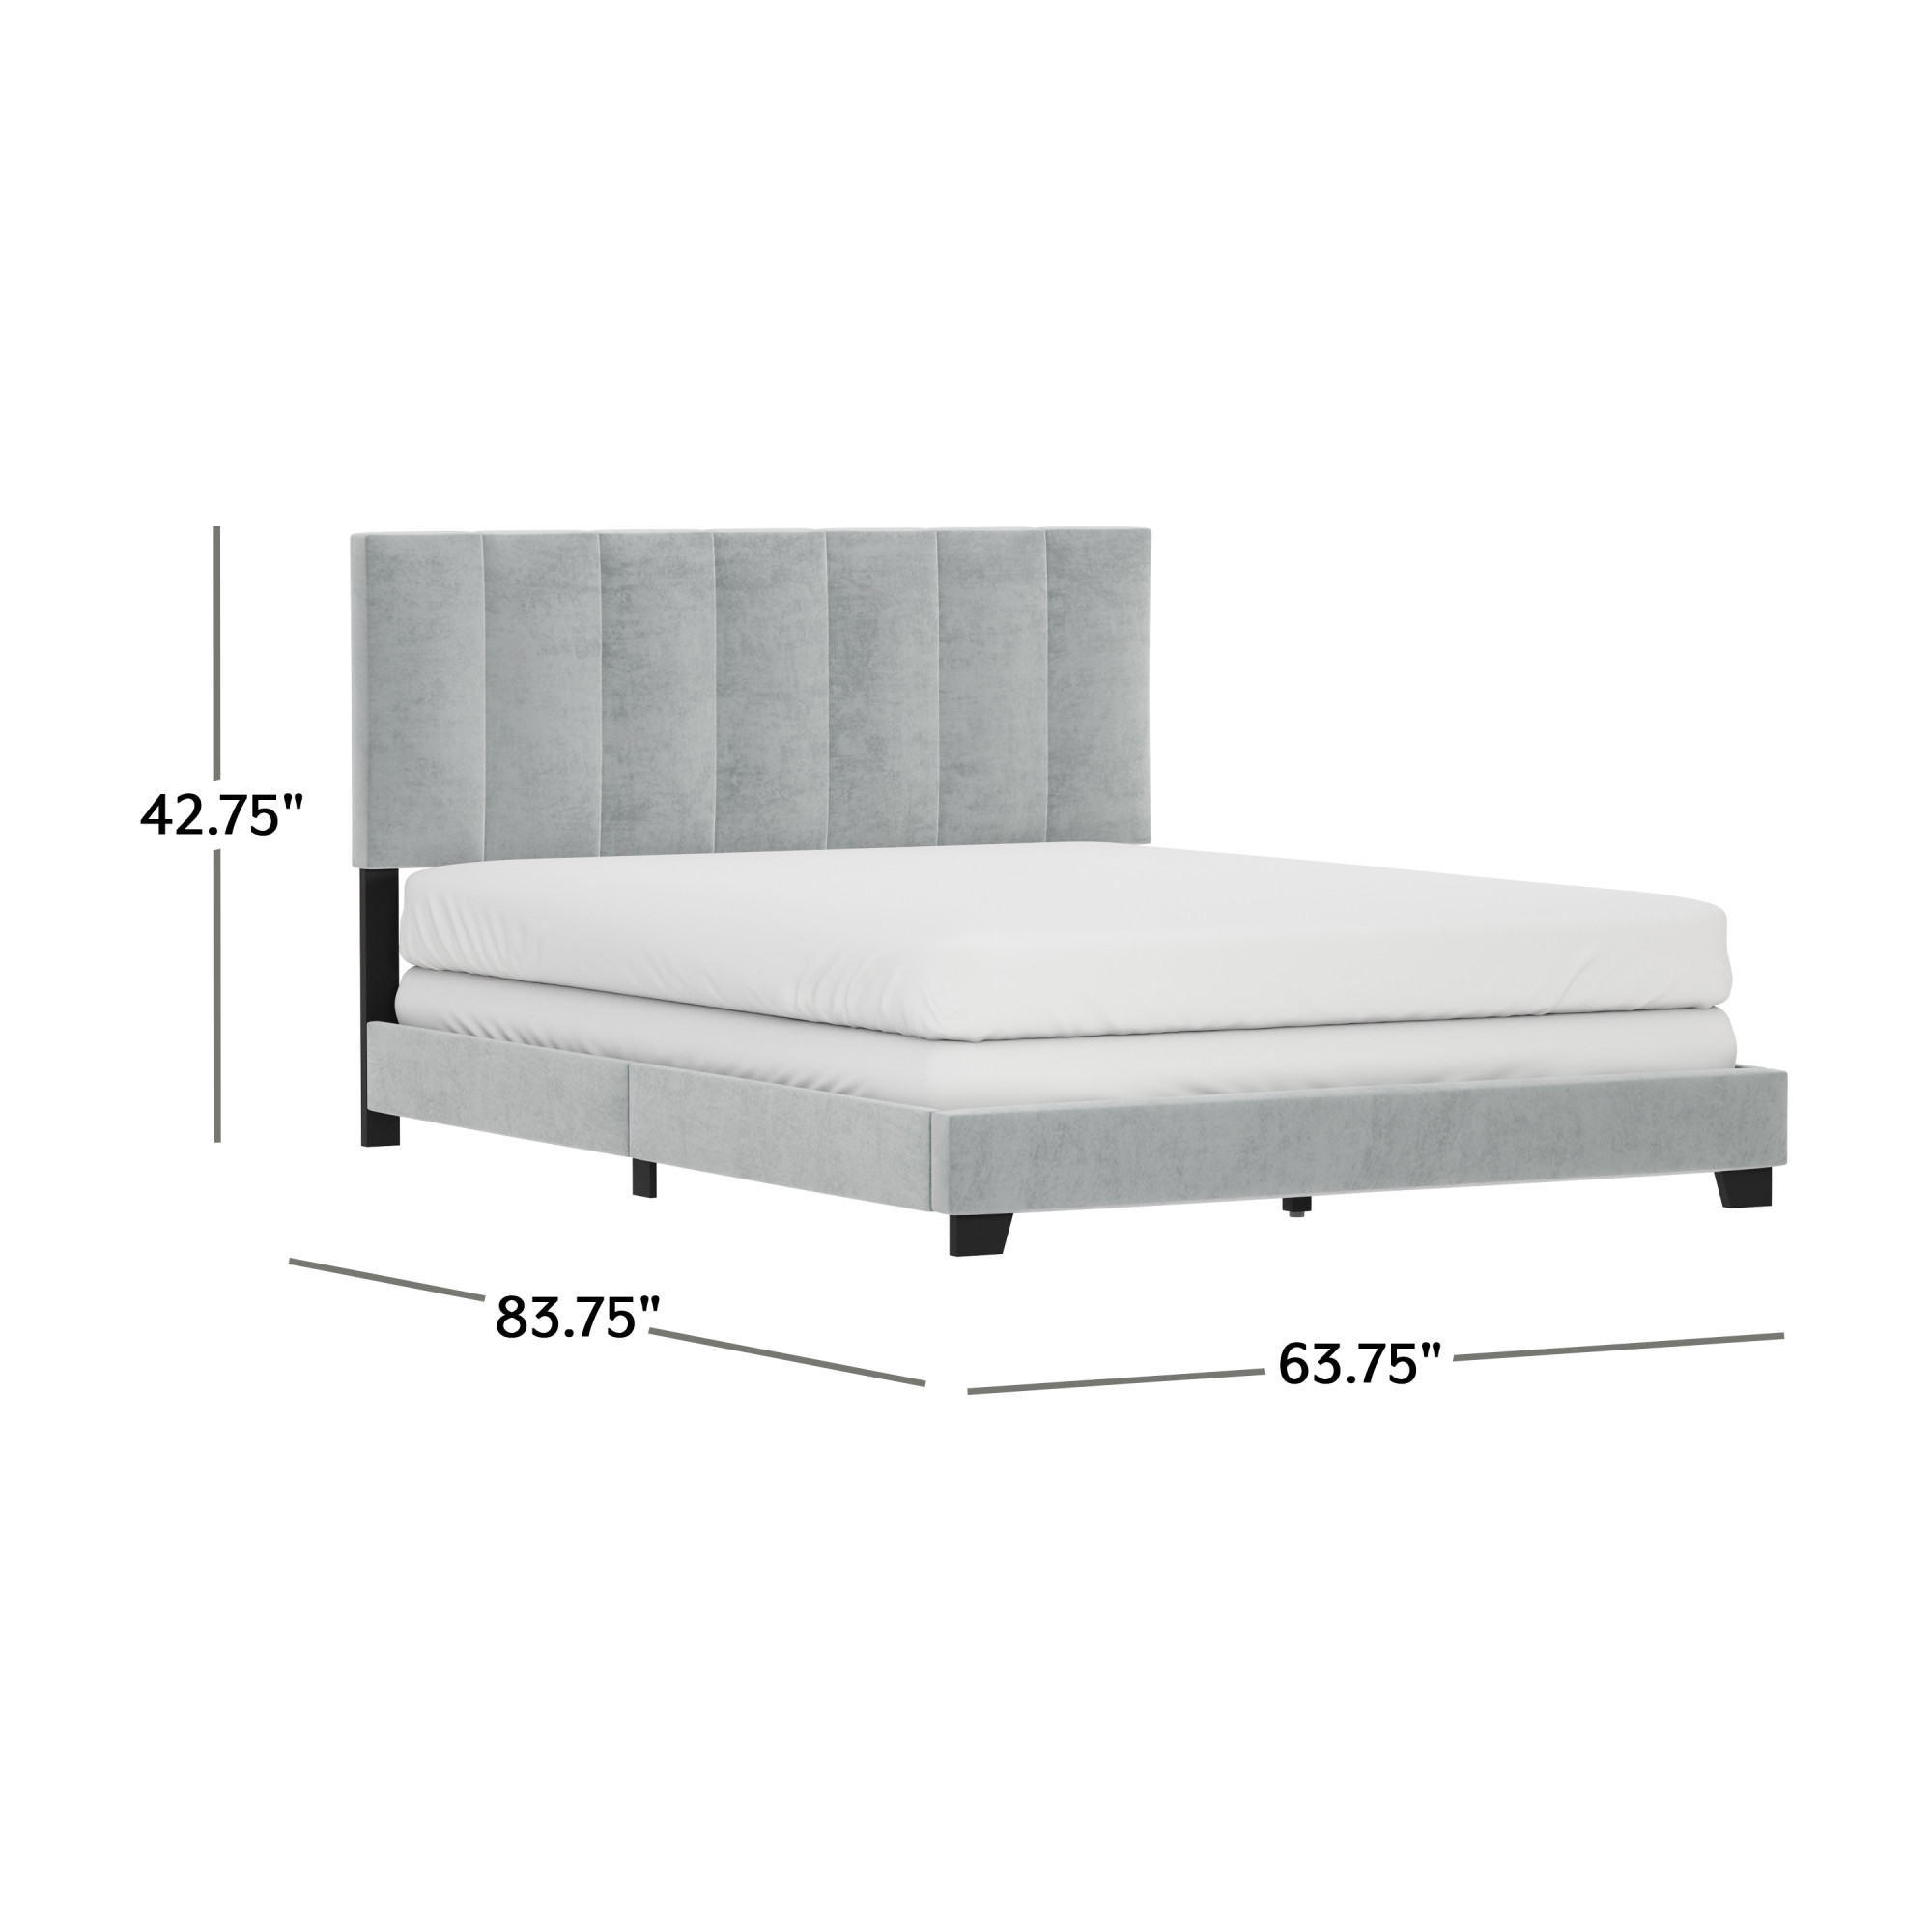 Reece Channel Stitched Upholstered Queen Bed, Platinum Gray, by Hillsdale Living Essentials - image 4 of 14